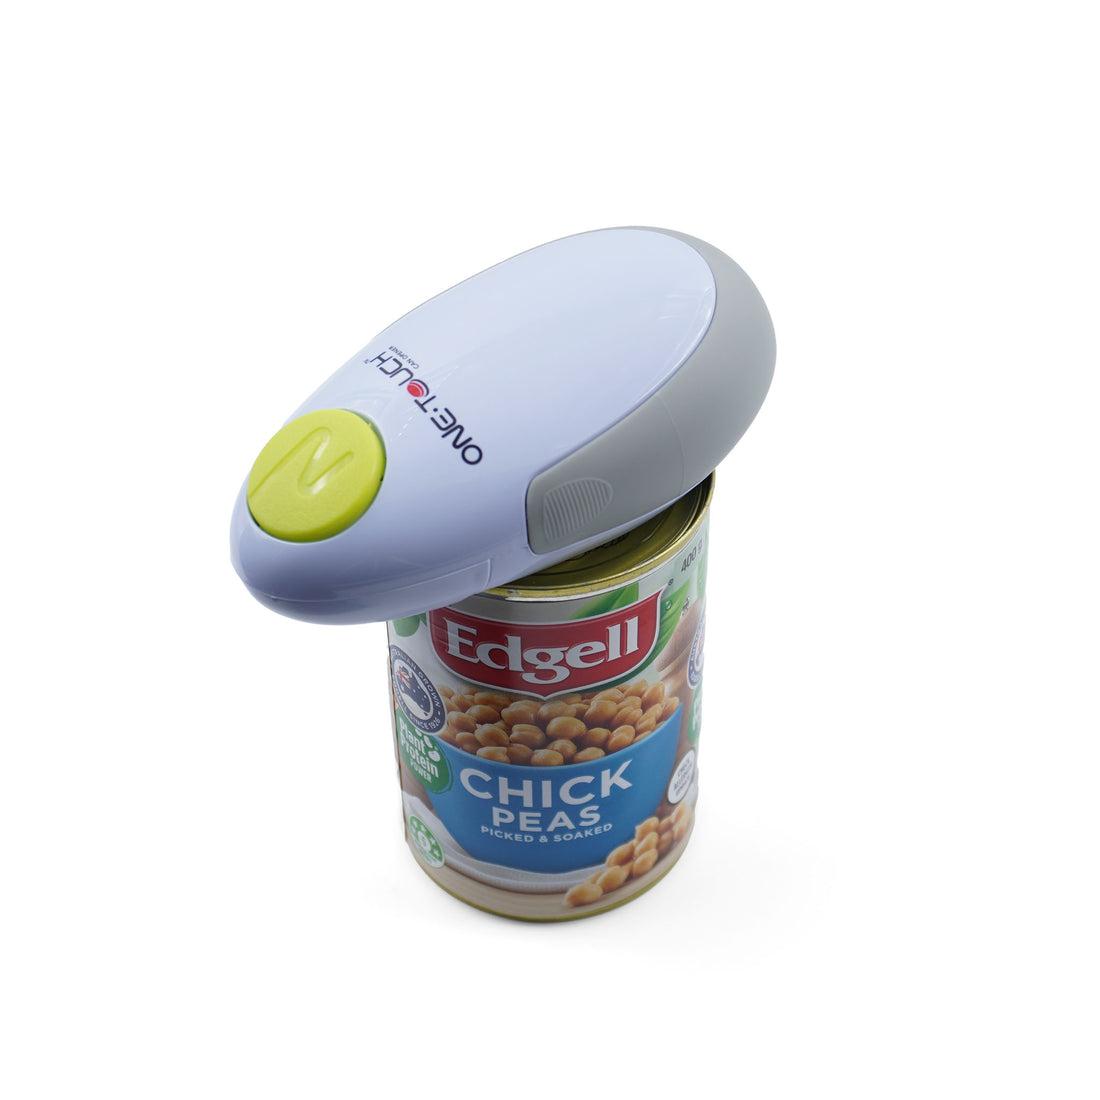 One touch can opener on top of a can of chick peas